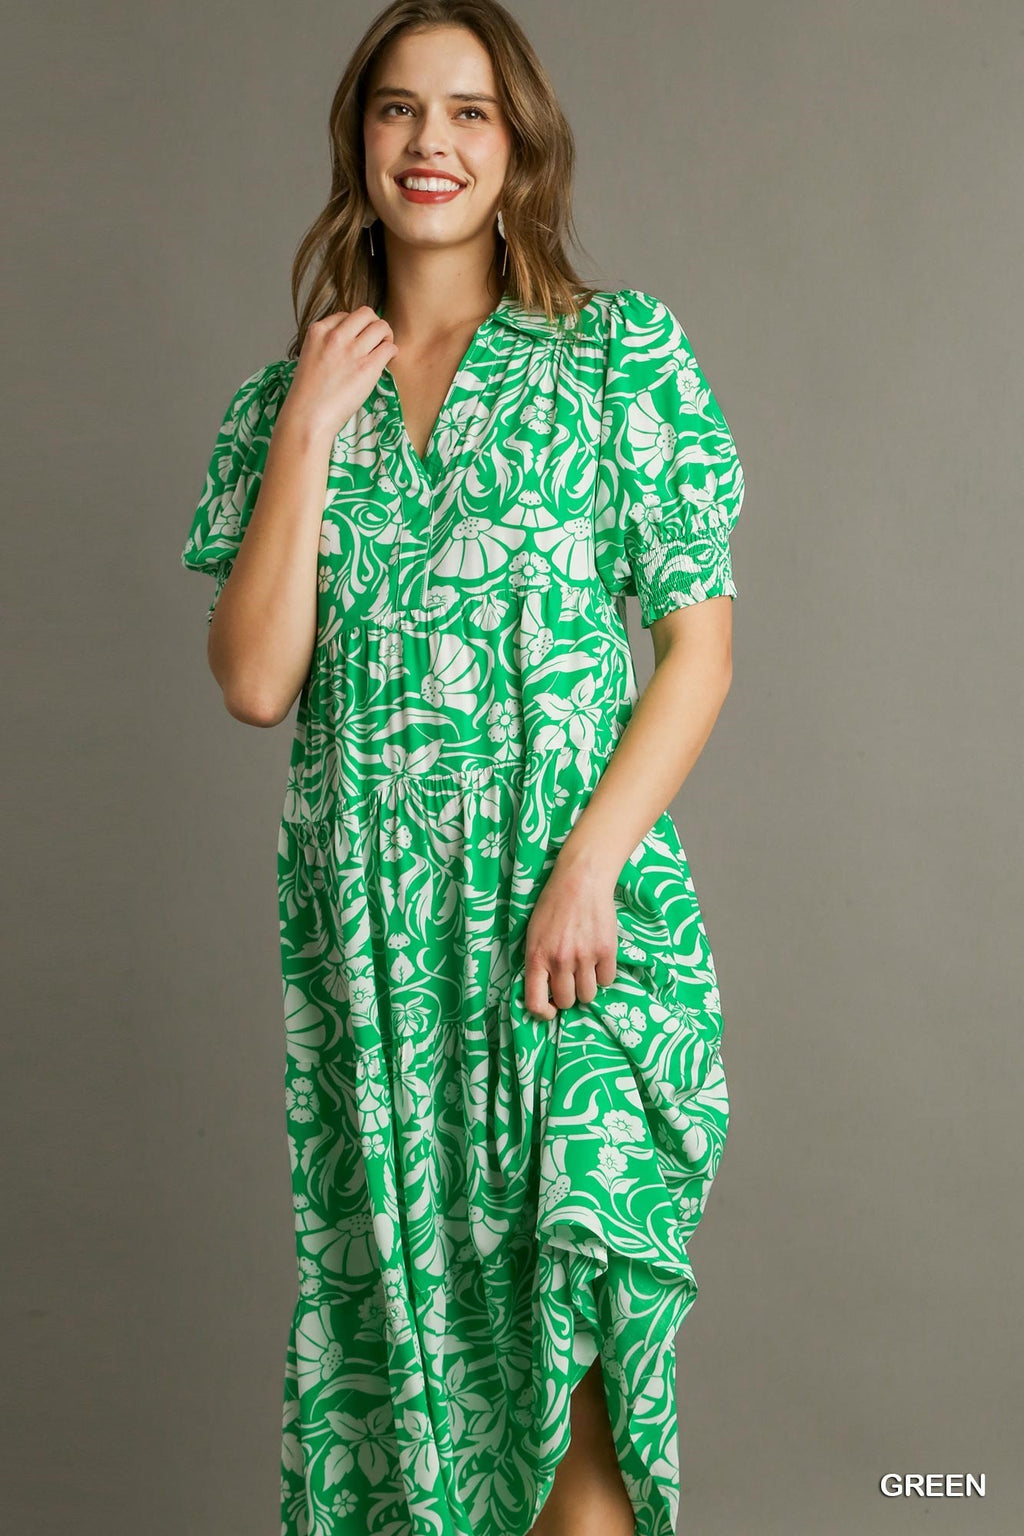 Green Floral Tiered A-Line Collared Midi Dress with Pleated Puff Sleeves B8683